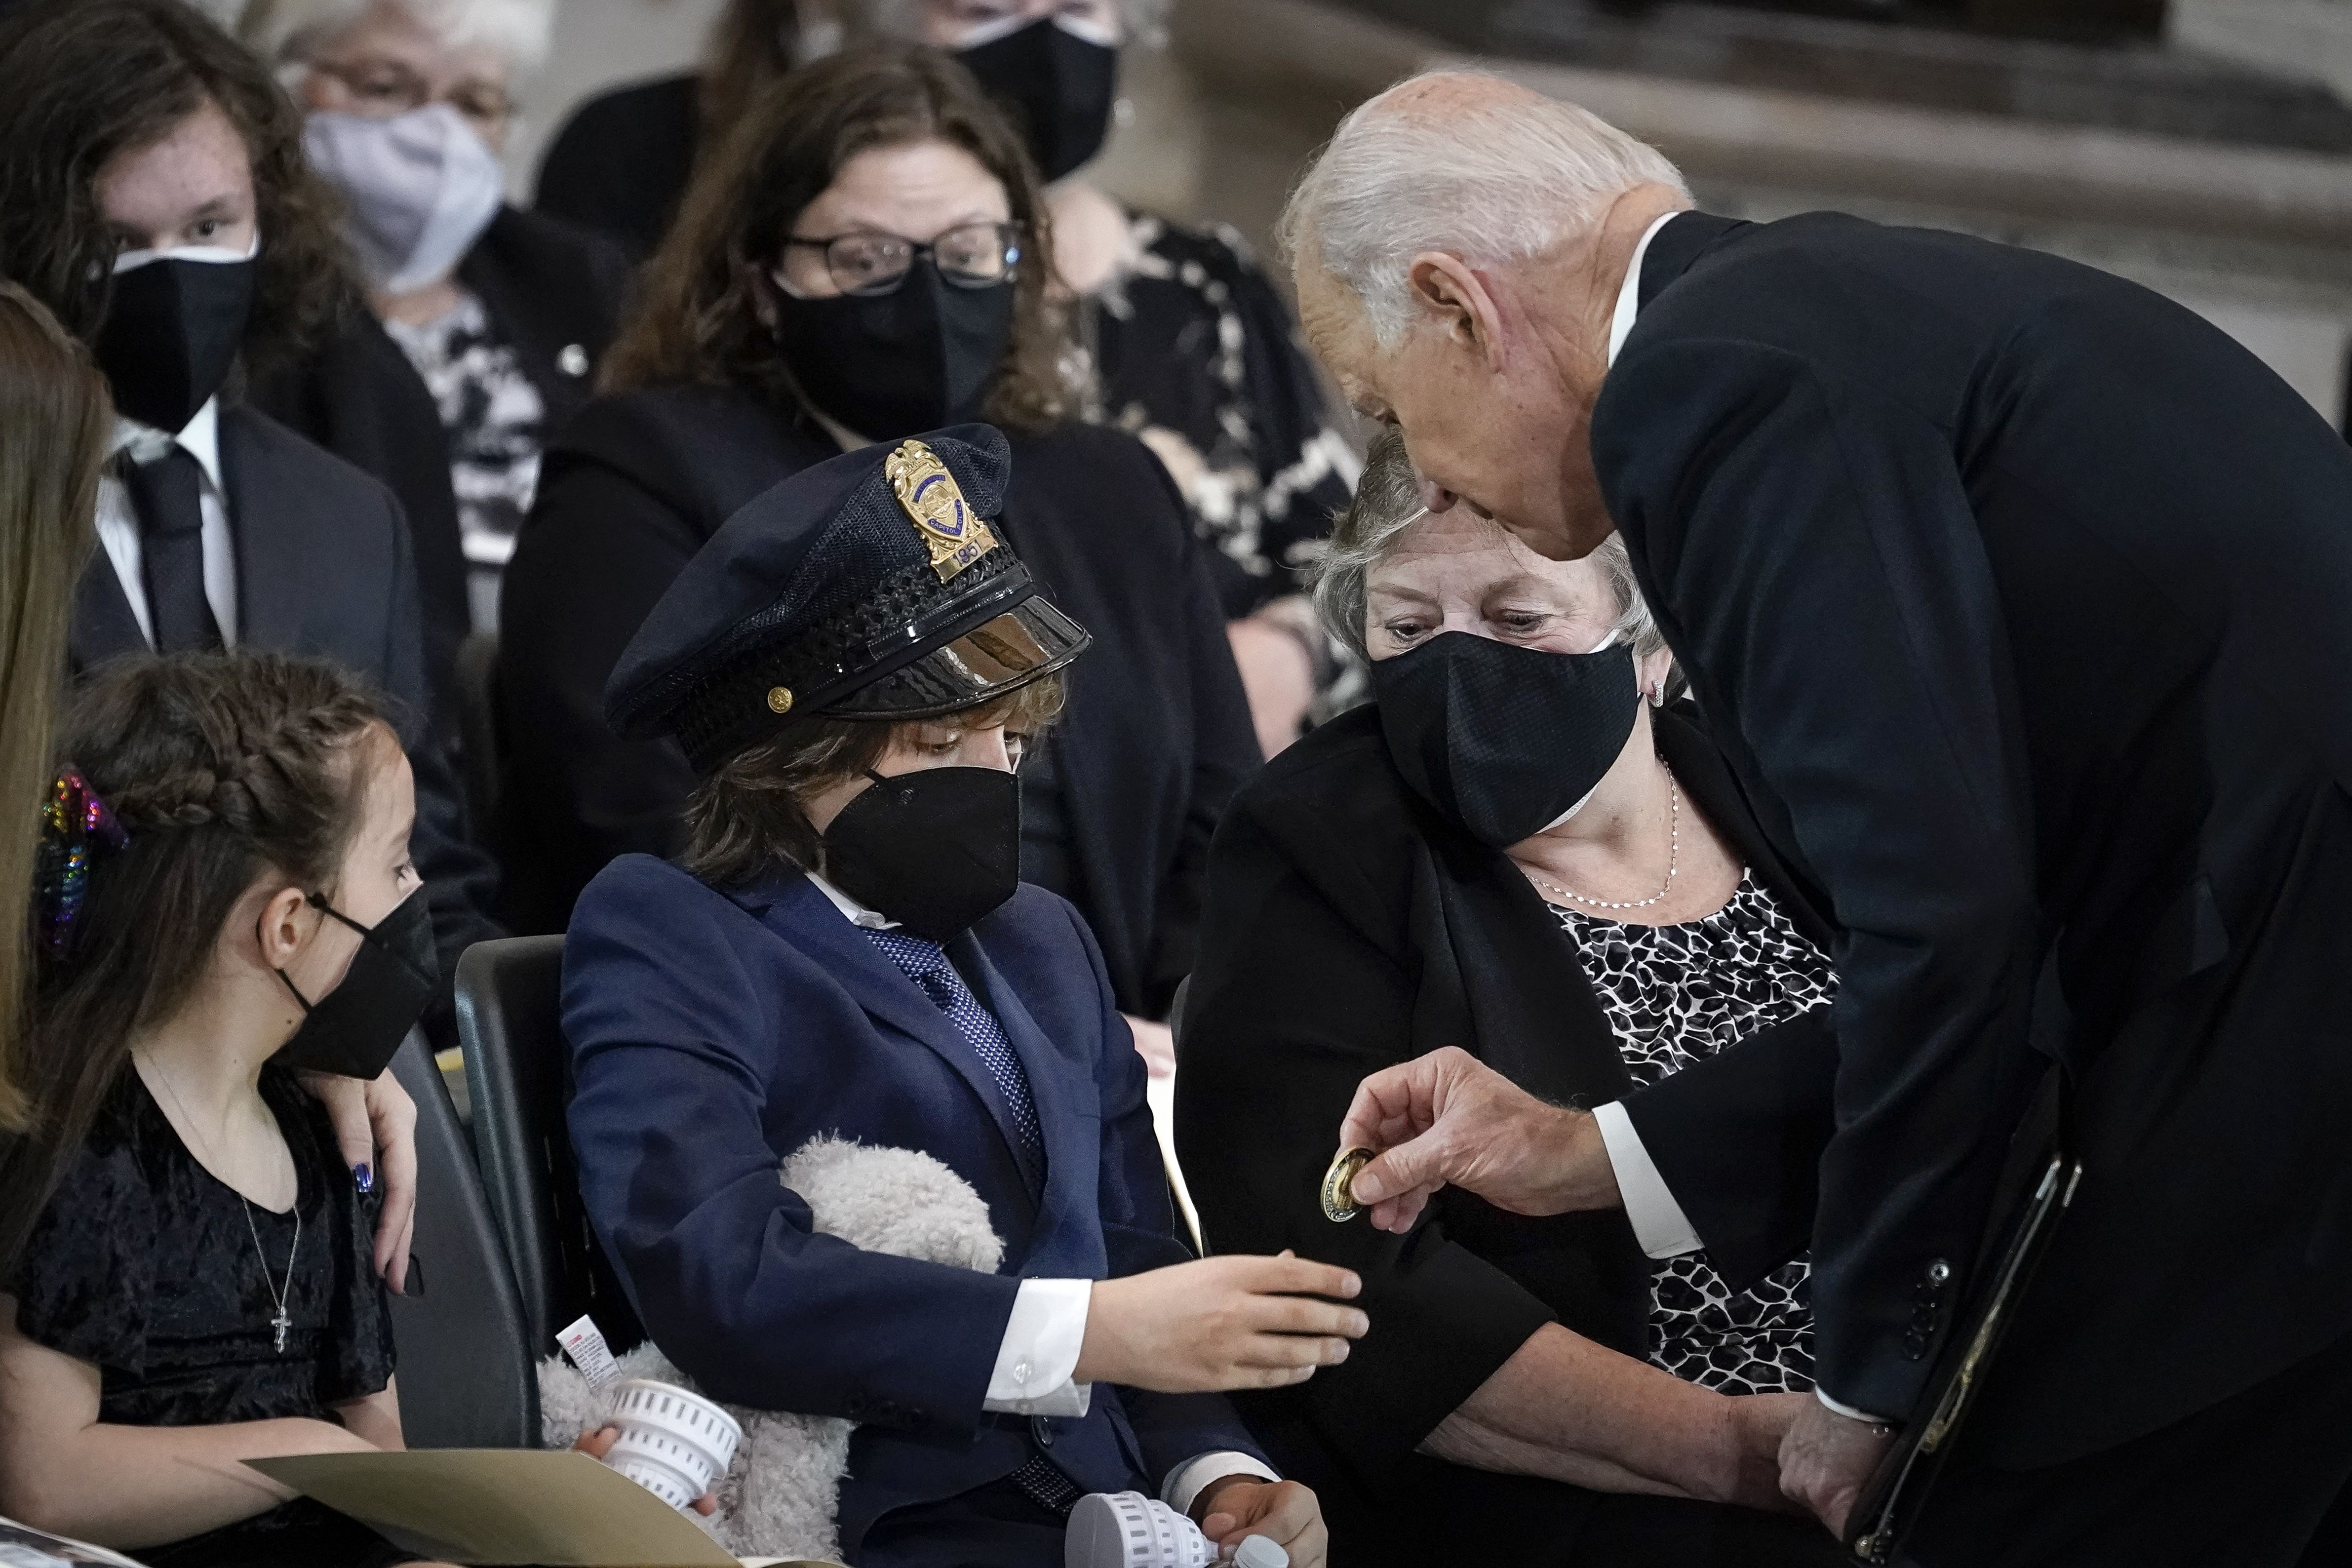 Biden giving a coin to child of fallen Capitol police officer